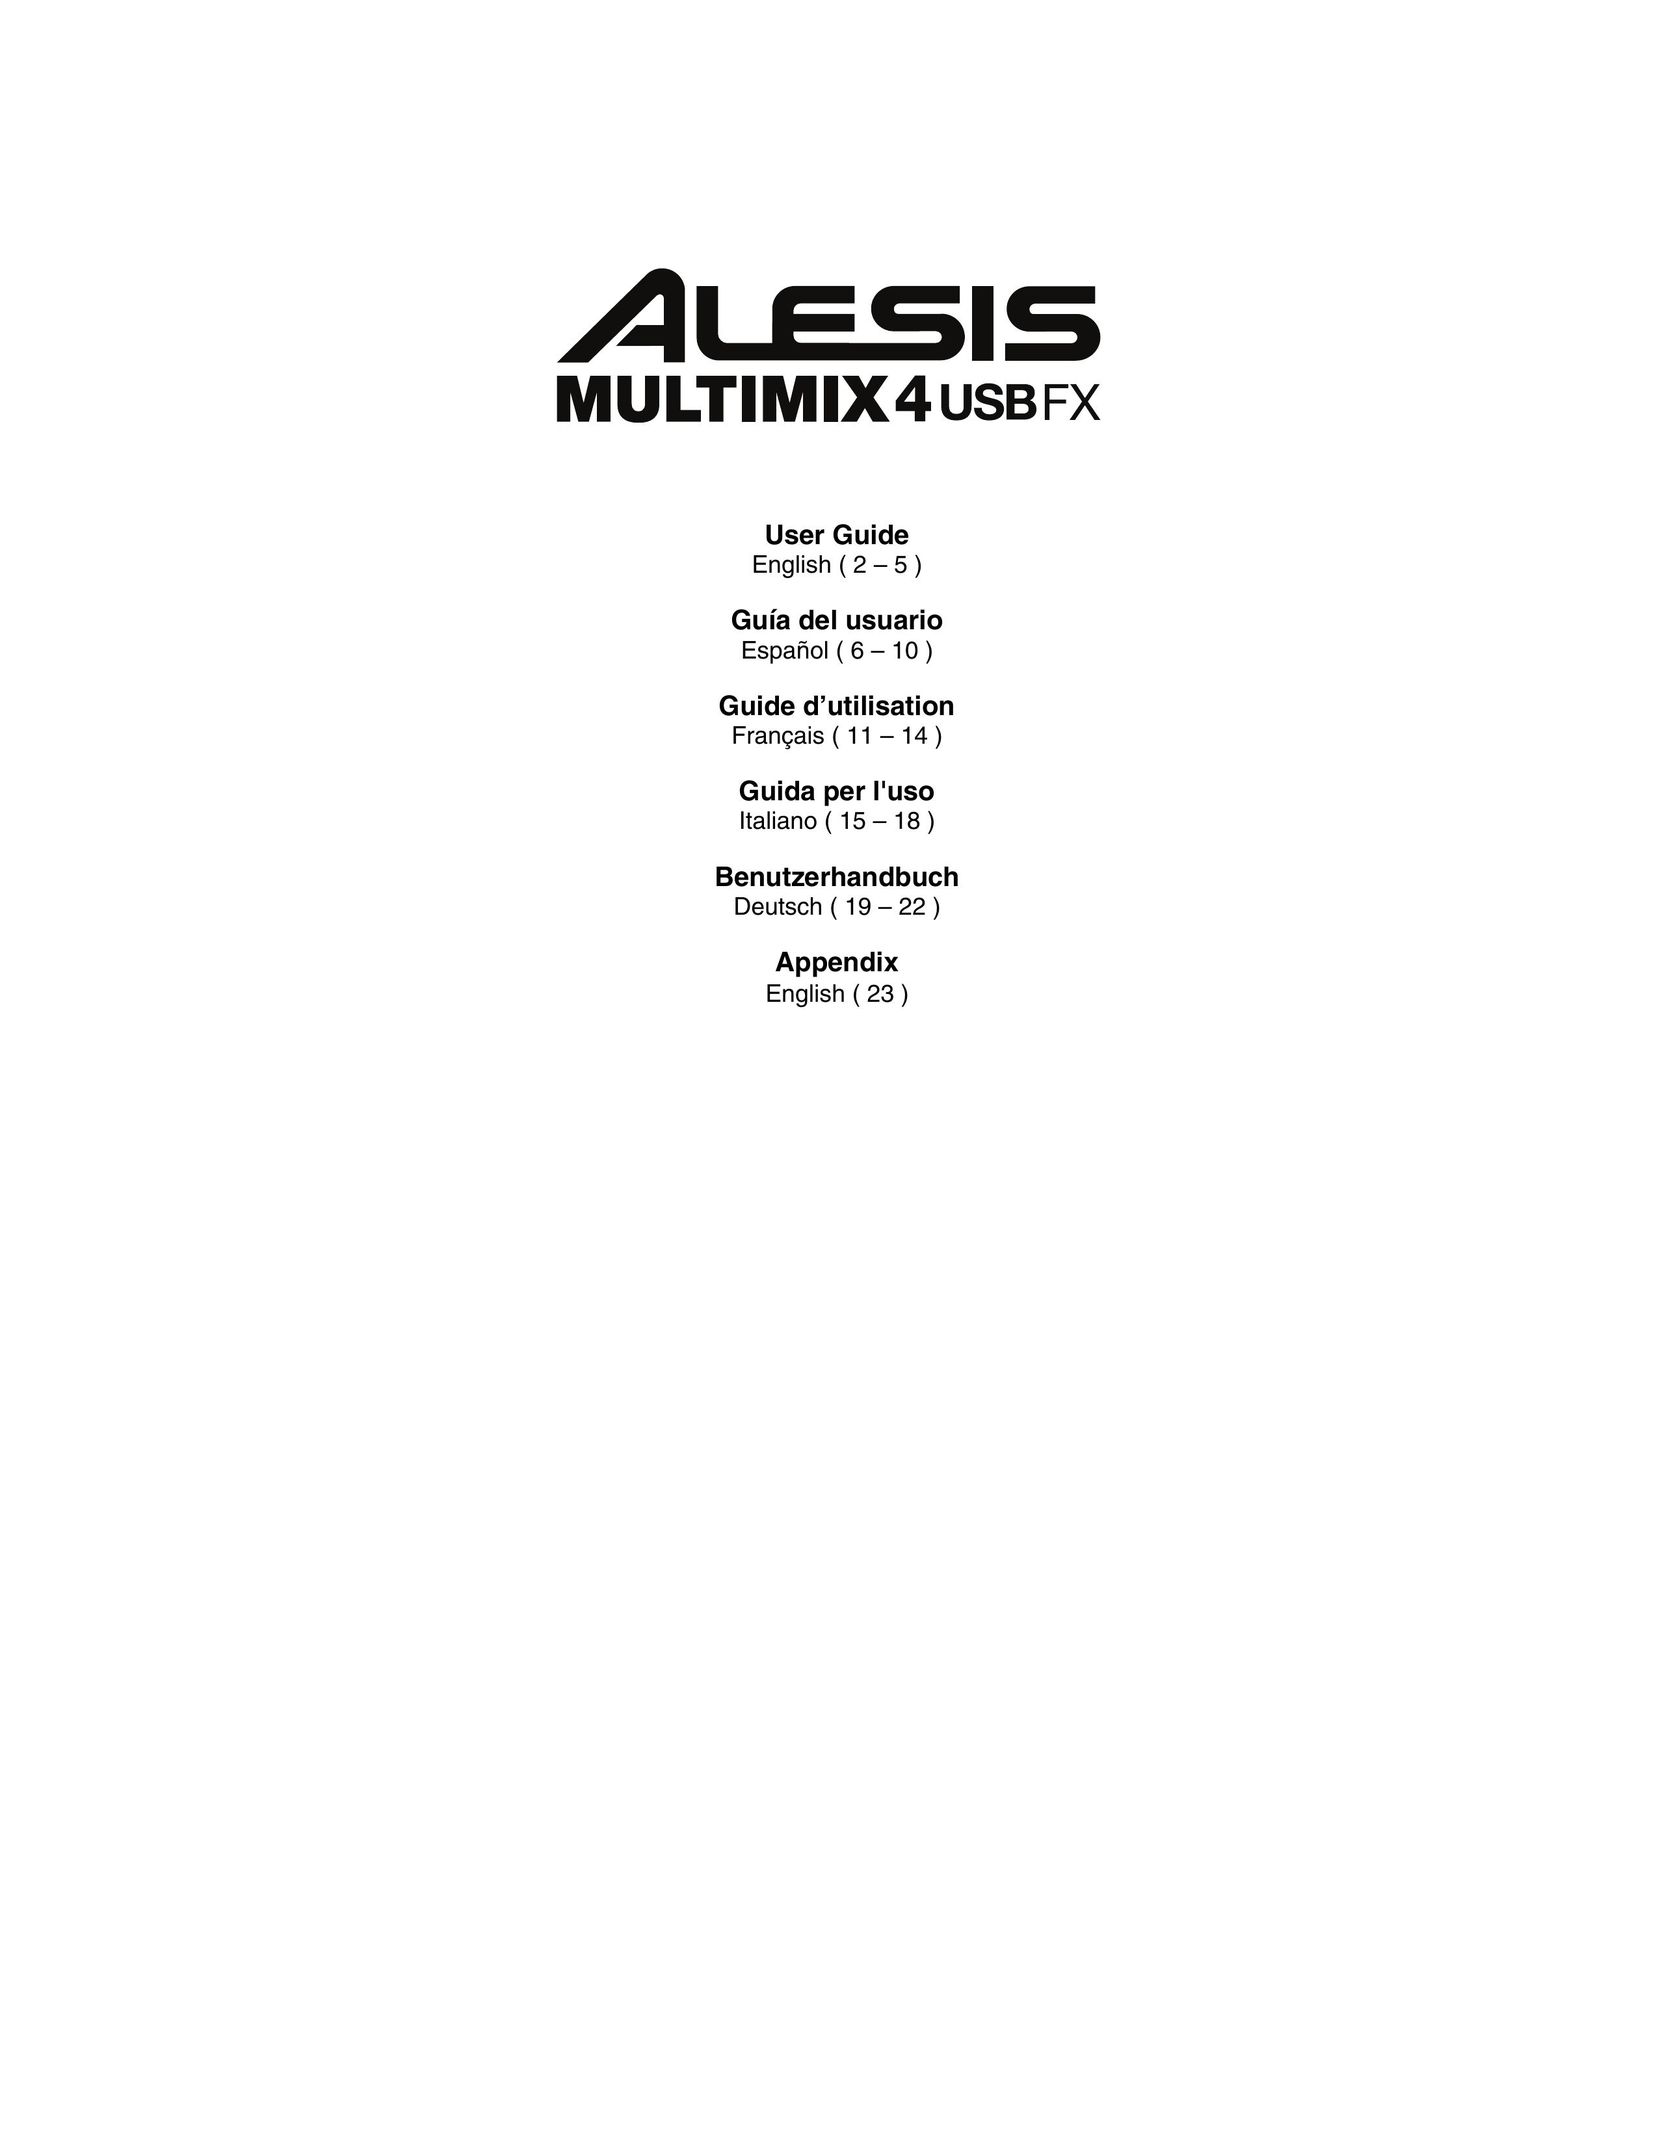 Alesis MultiMix 4 USB FX Stereo System User Manual